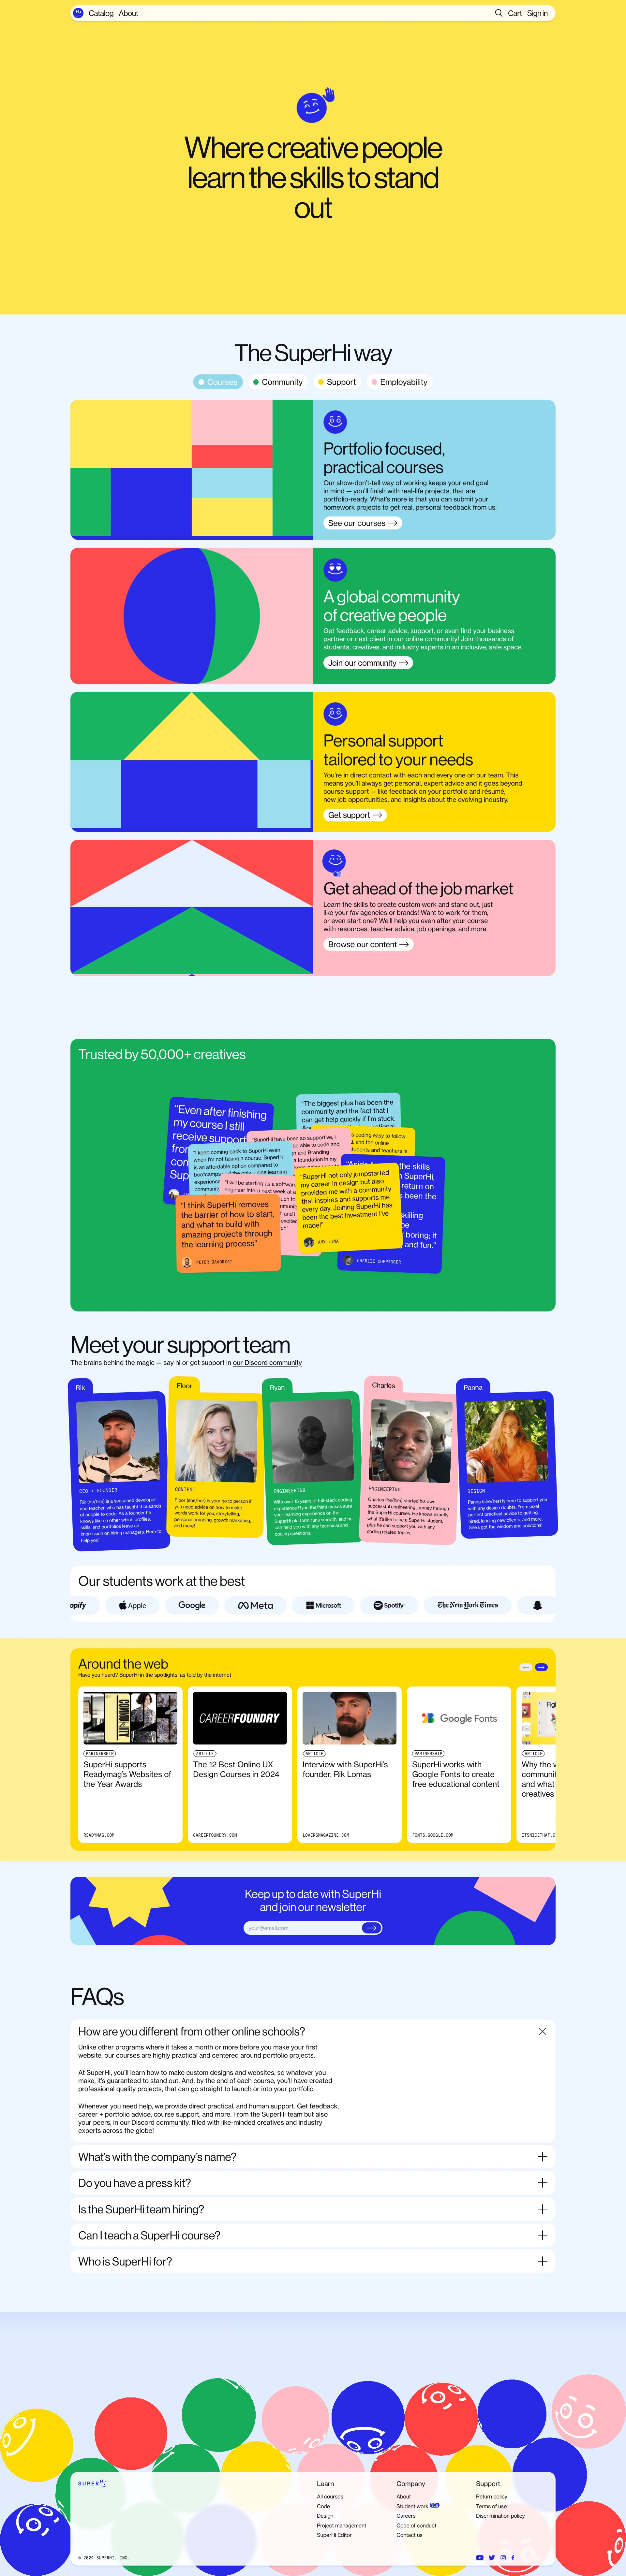 SuperHi Landing Page Example: Online code, design, and project management courses. Curate your own creative career. Join SuperHi with 50,00050,000+ learners worldwide and gain technical skills through our practical courses.